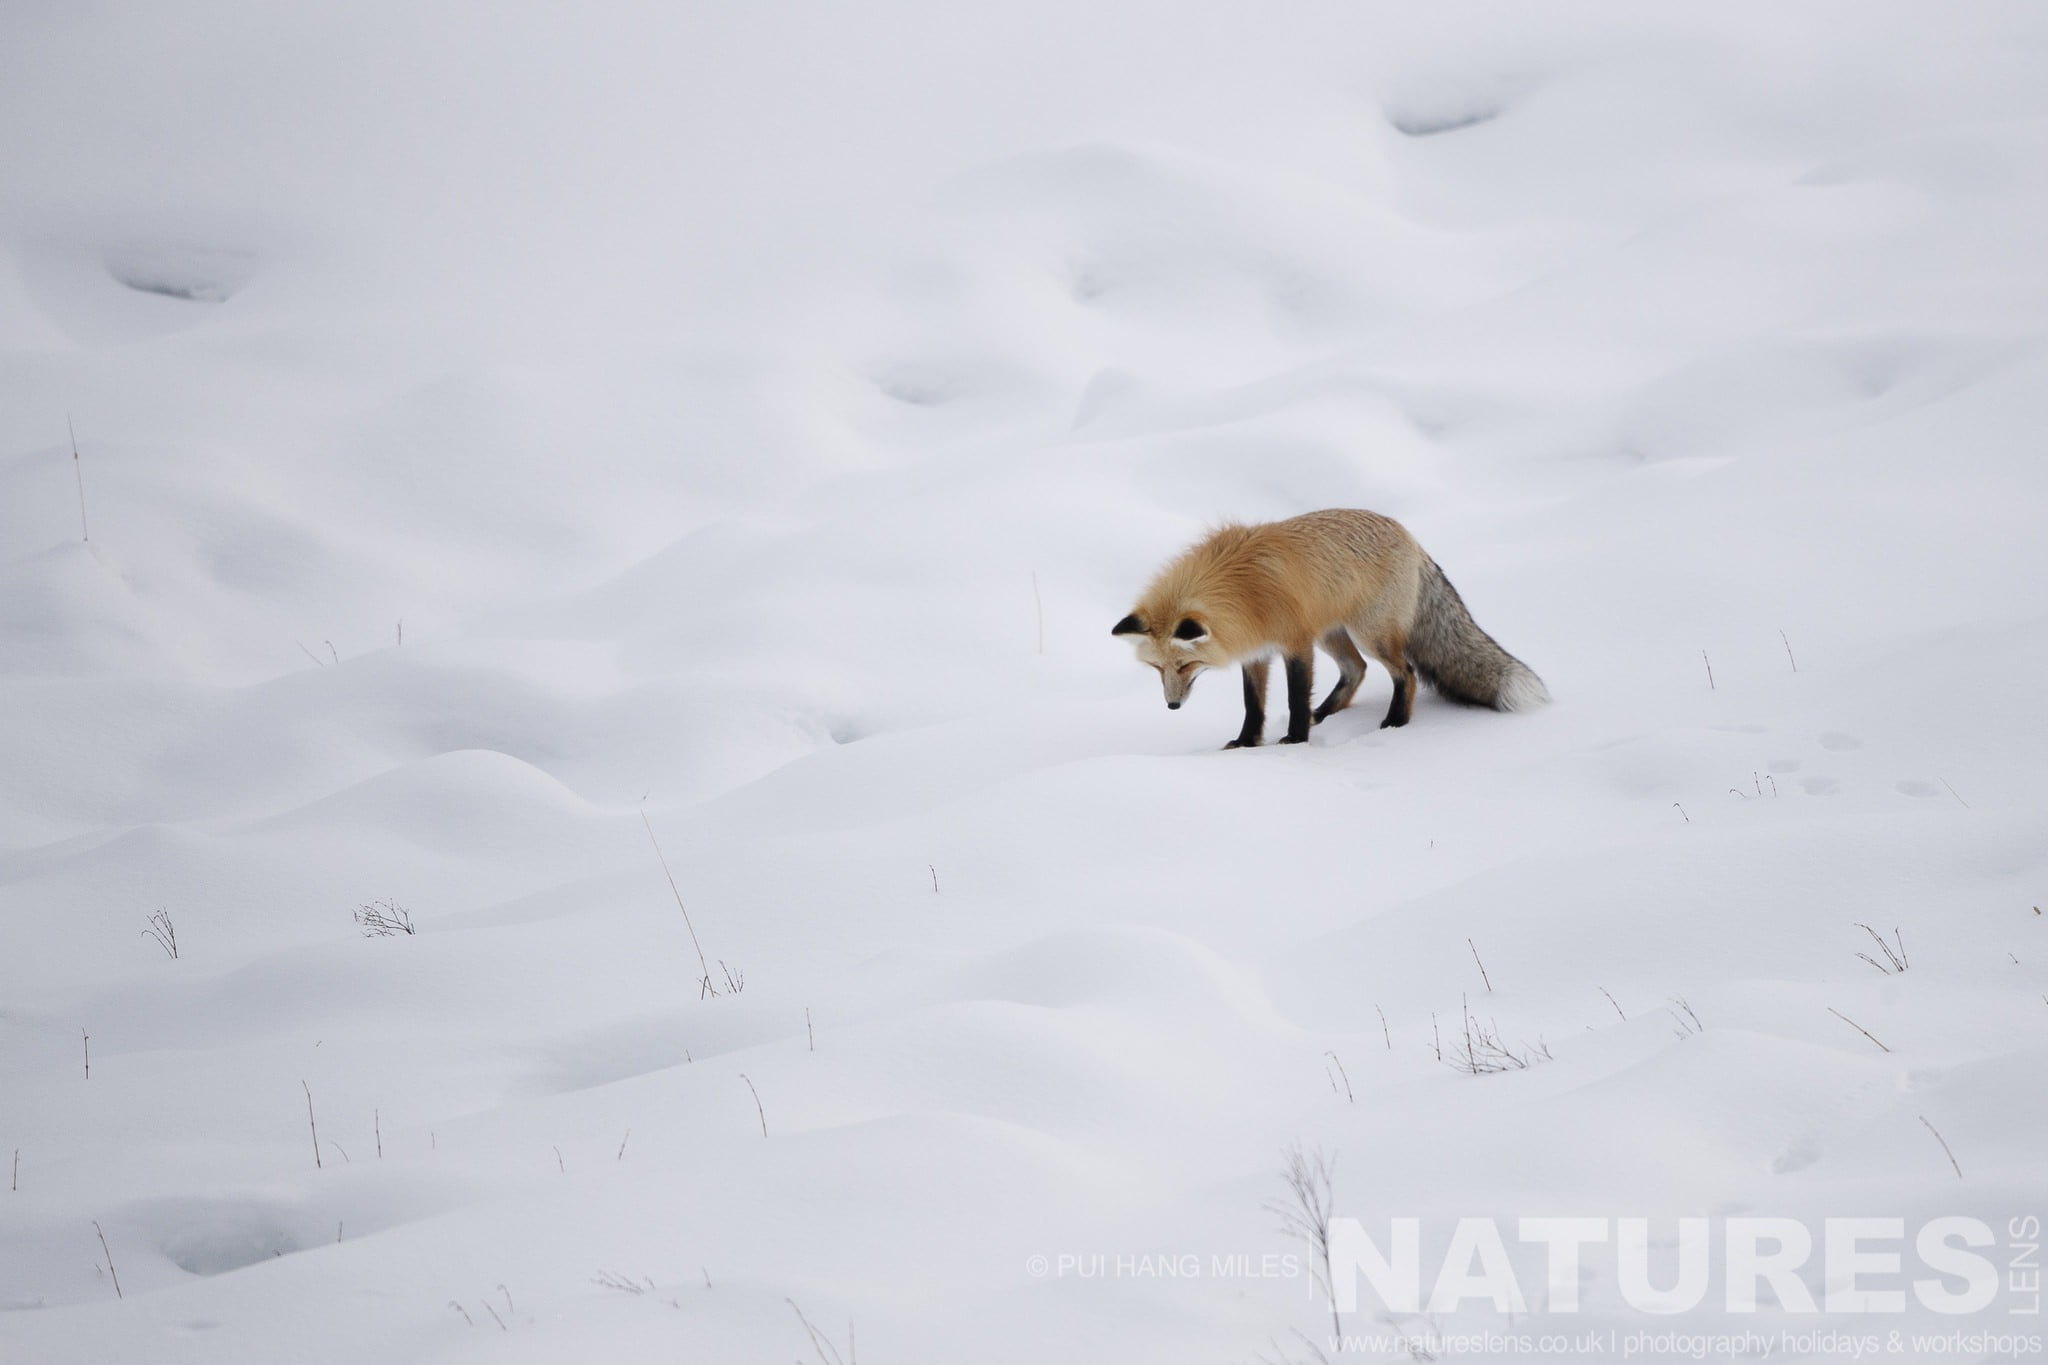 One Of Yellowstone'S Foxes Seeks A Mouse In The Deep Snow Typical Of The Type Of Image That You Will Capture During The Wildlife Of Yellowstone In Winter Photography Holiday